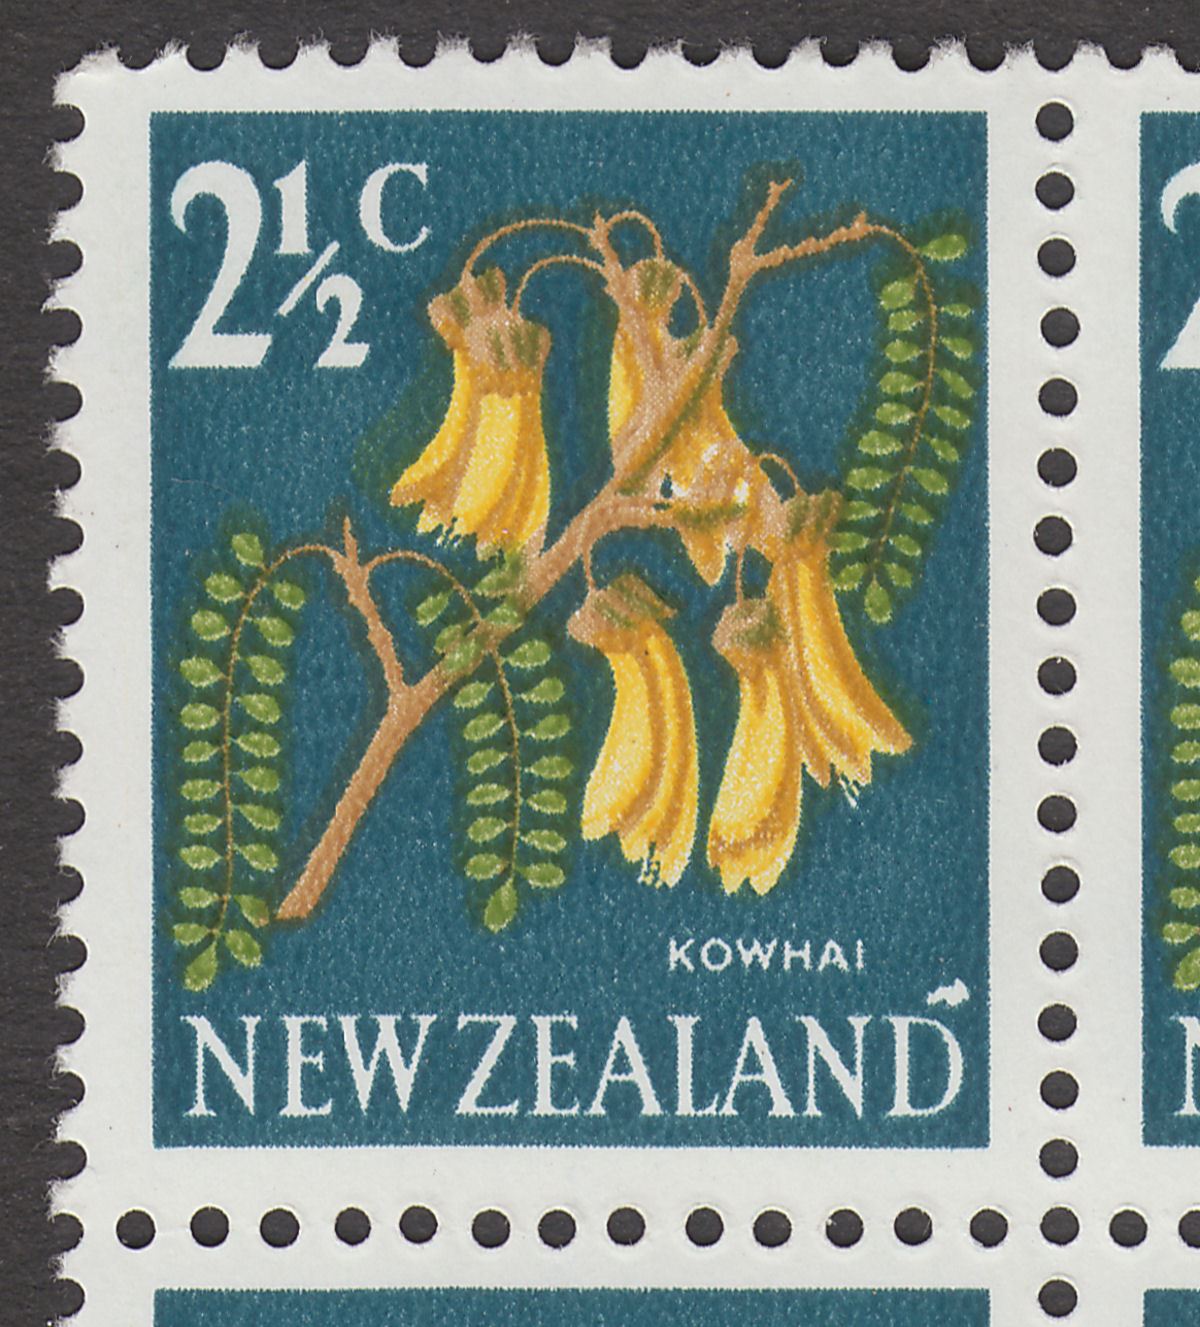 New Zealand 1967 QEII Kowhai 2½c Block Selection with Varieties Mint SG848